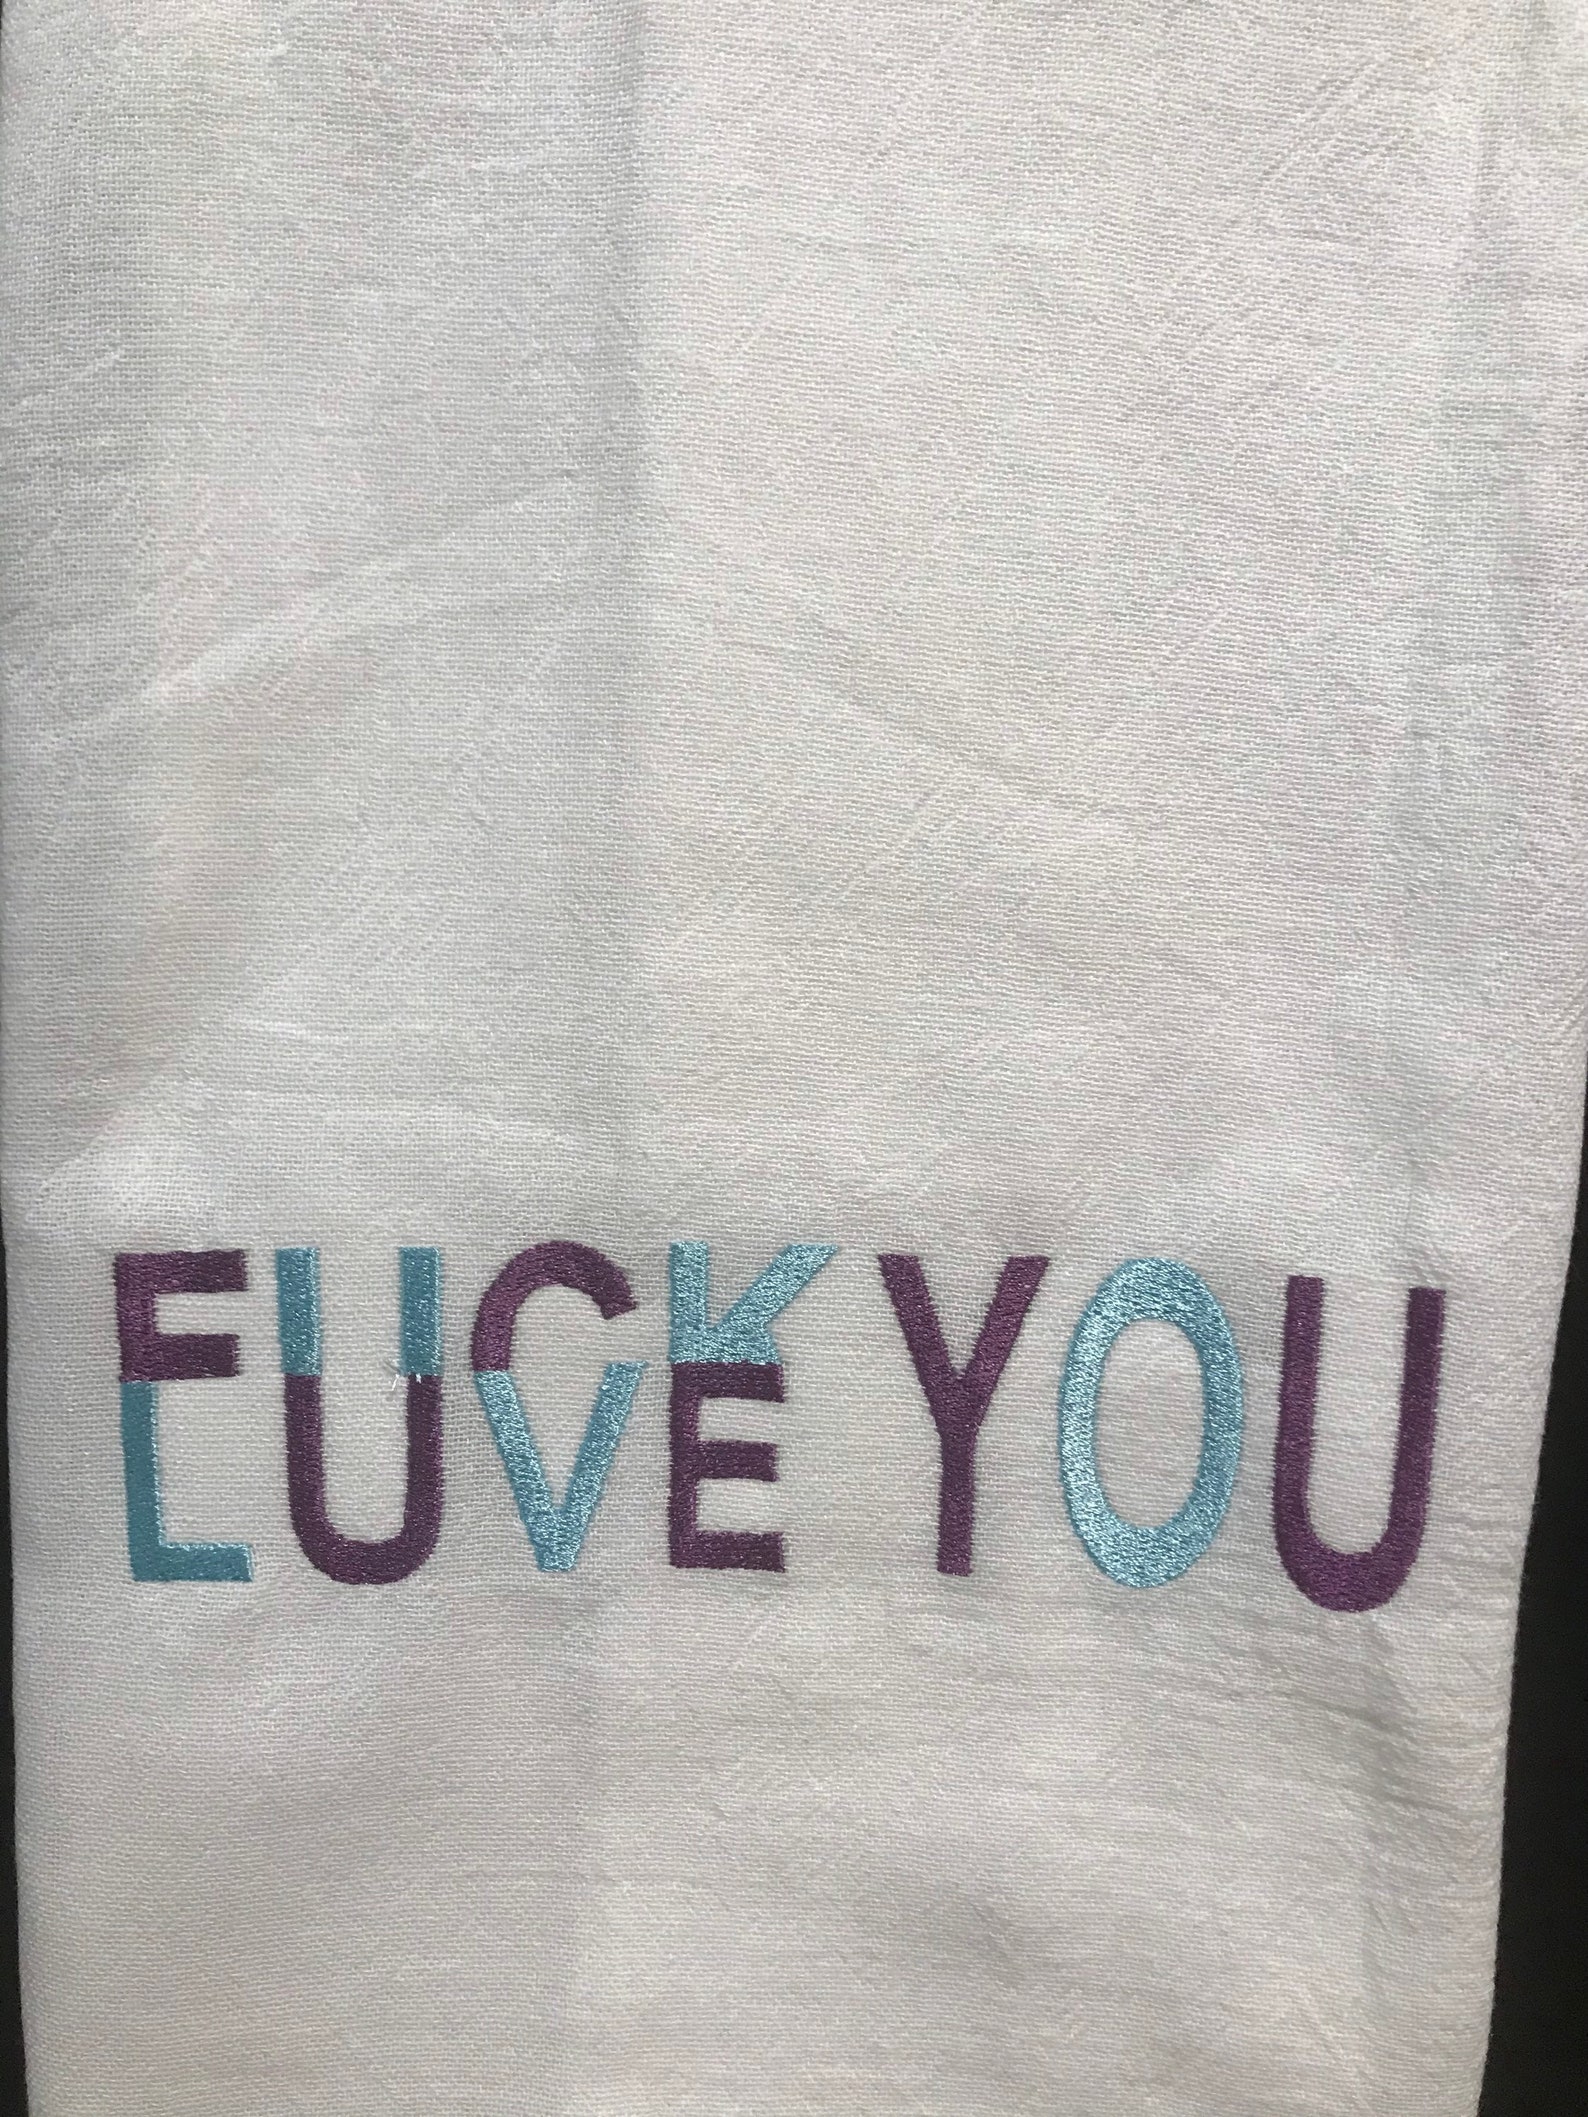 Fuck Love/you Embroidered Flour Sack Towel - Etsy